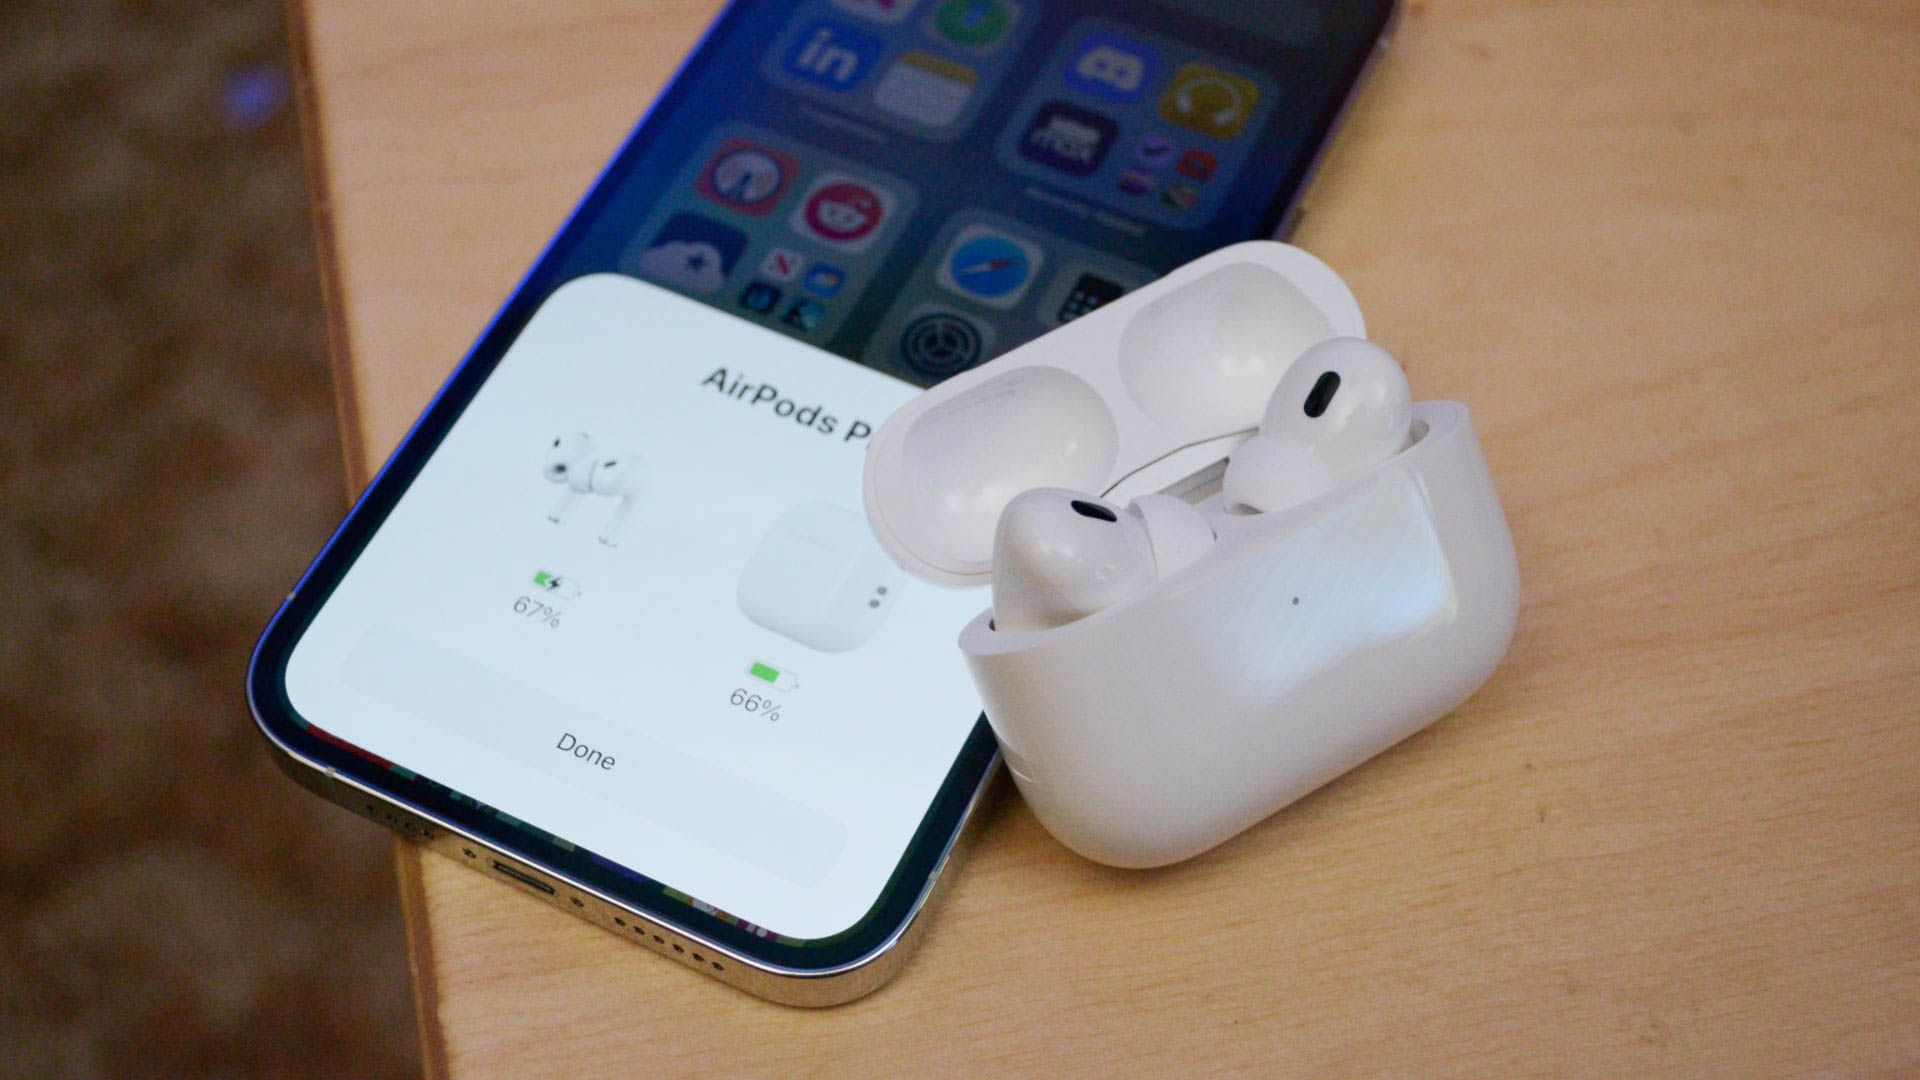 Pairing the Apple AirPods Pro 2.